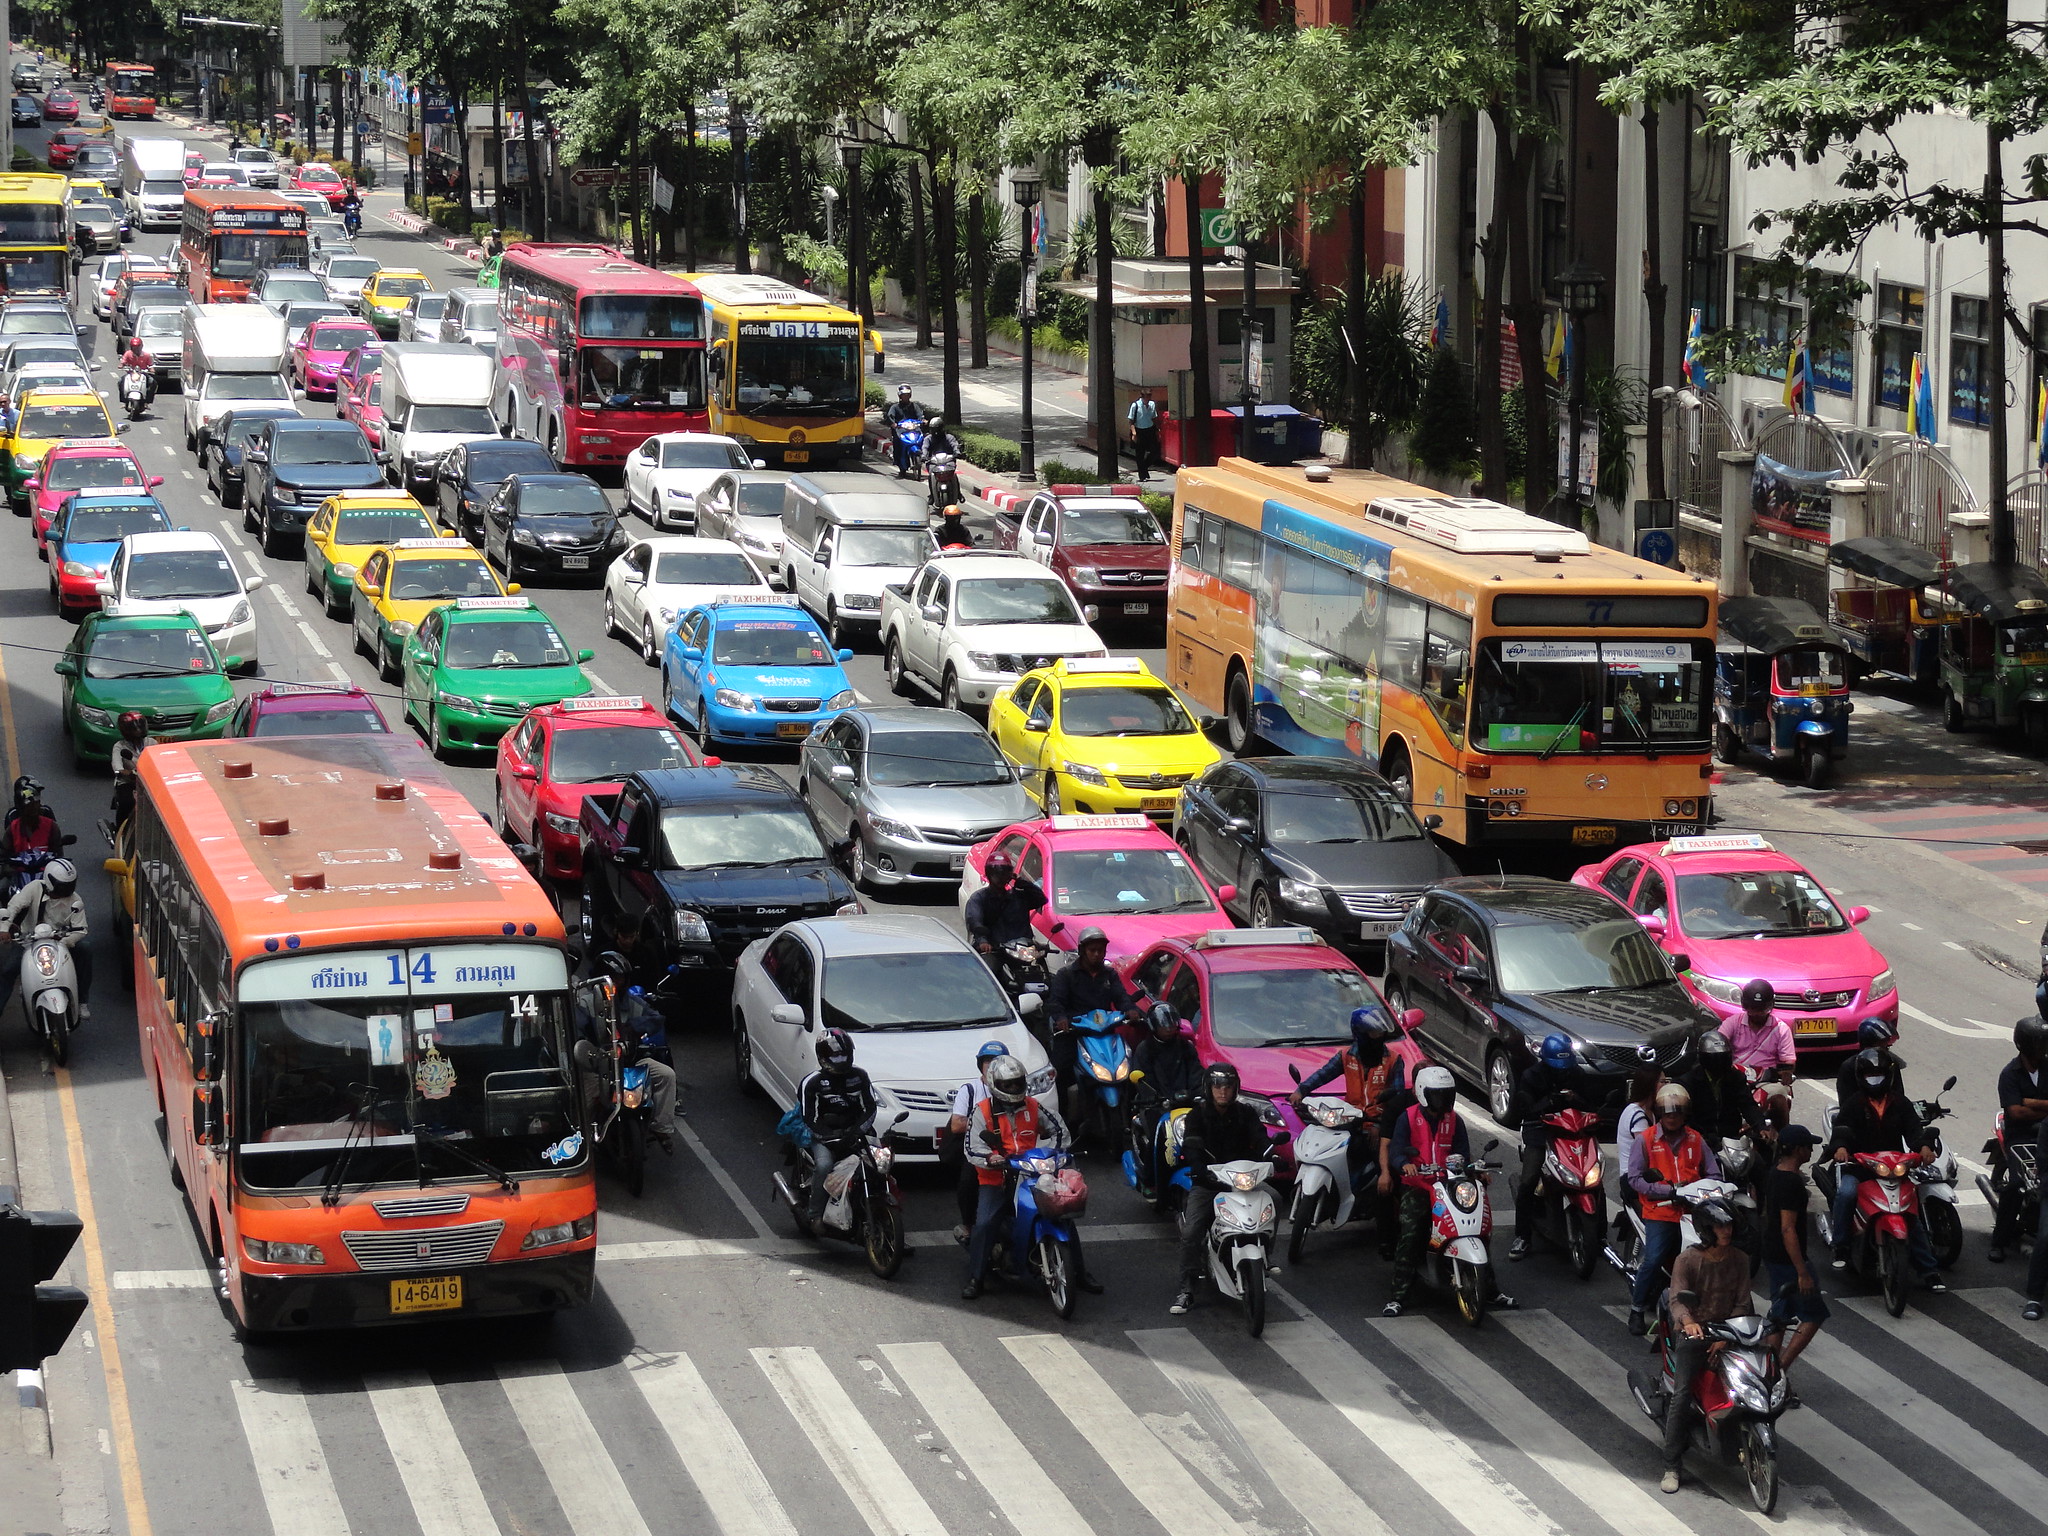 Bangkok's Traffic! Traffic at the corner of Ratchadamri and Rama I Road in Siam District of Bangkok, August 21, 2012 (by Fabio Achilli CC BY 2.0 DEED via Flickr).